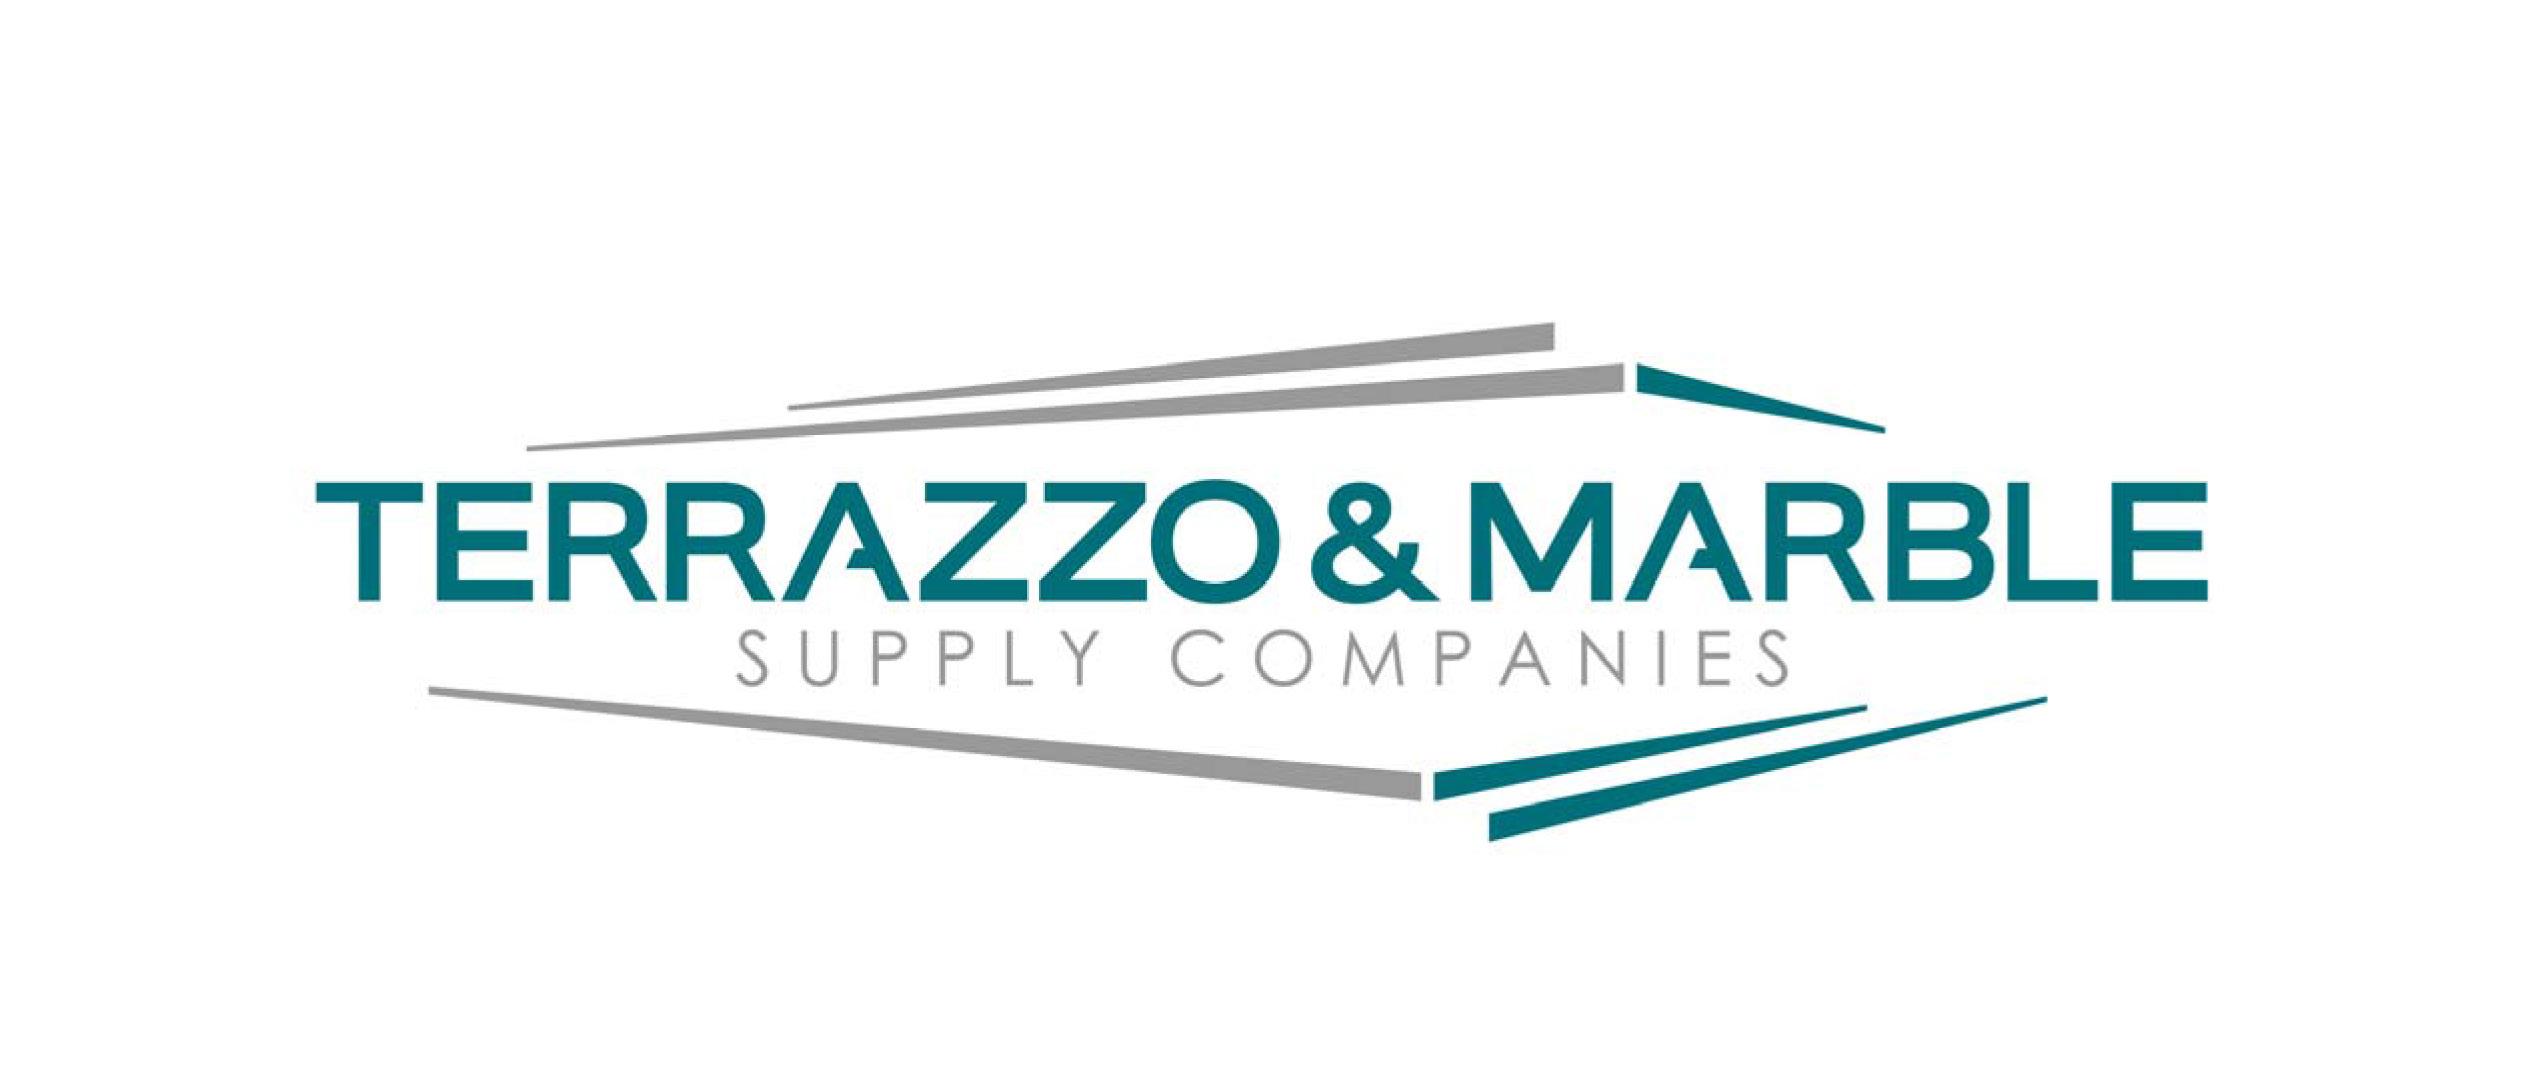 Terrazzo & Marble Supply Companies Golf Outing 2019